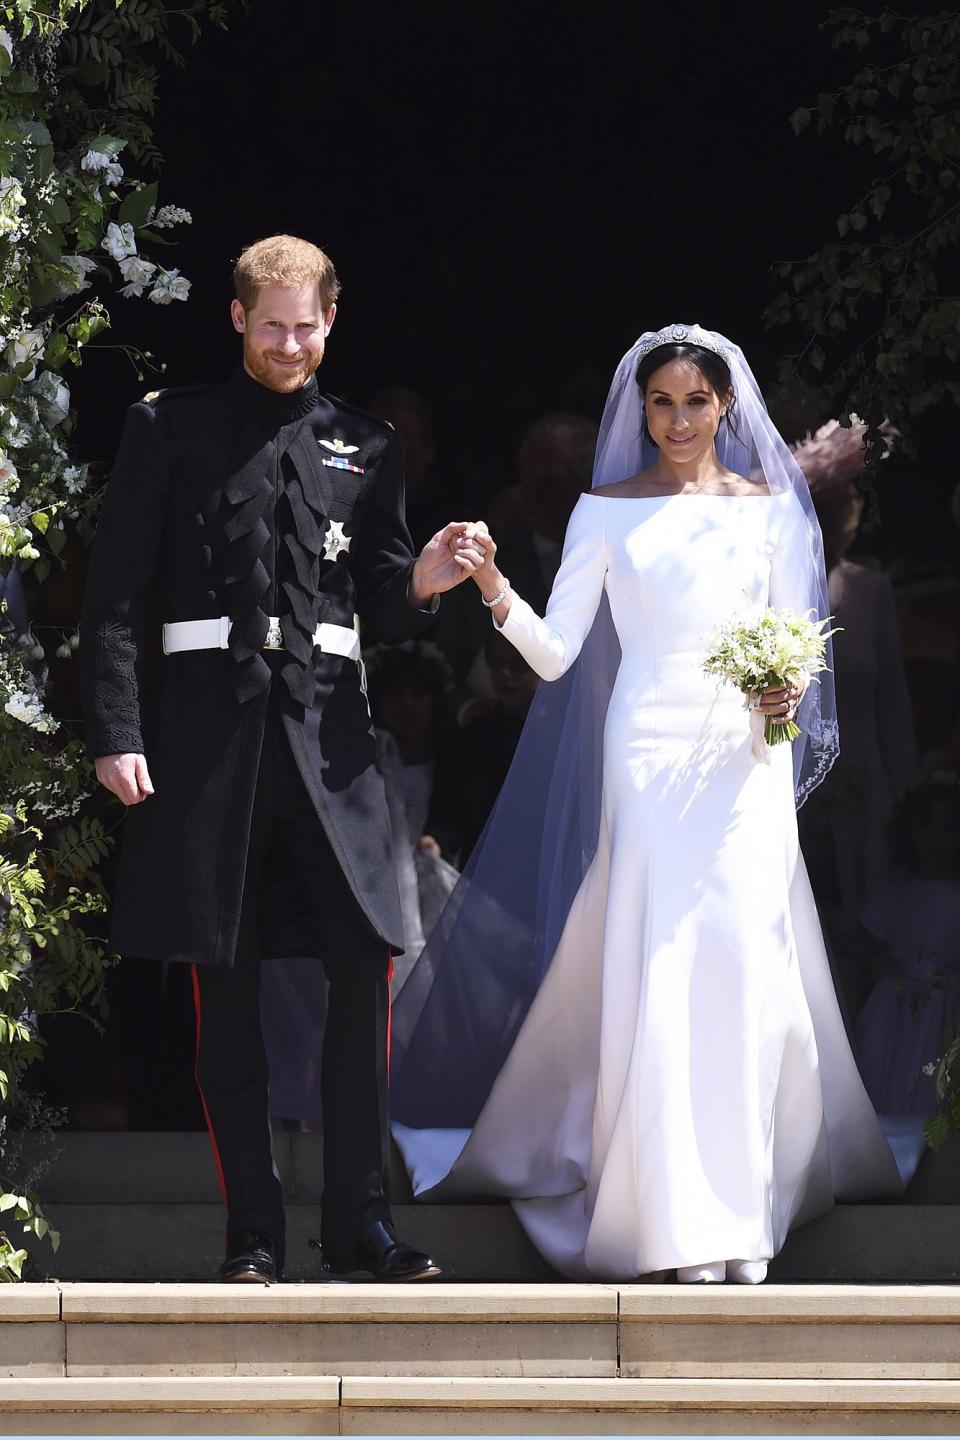 Happy Anniversary! Meghan Markle and Prince Harry Share Previously Unseen Wedding Photos